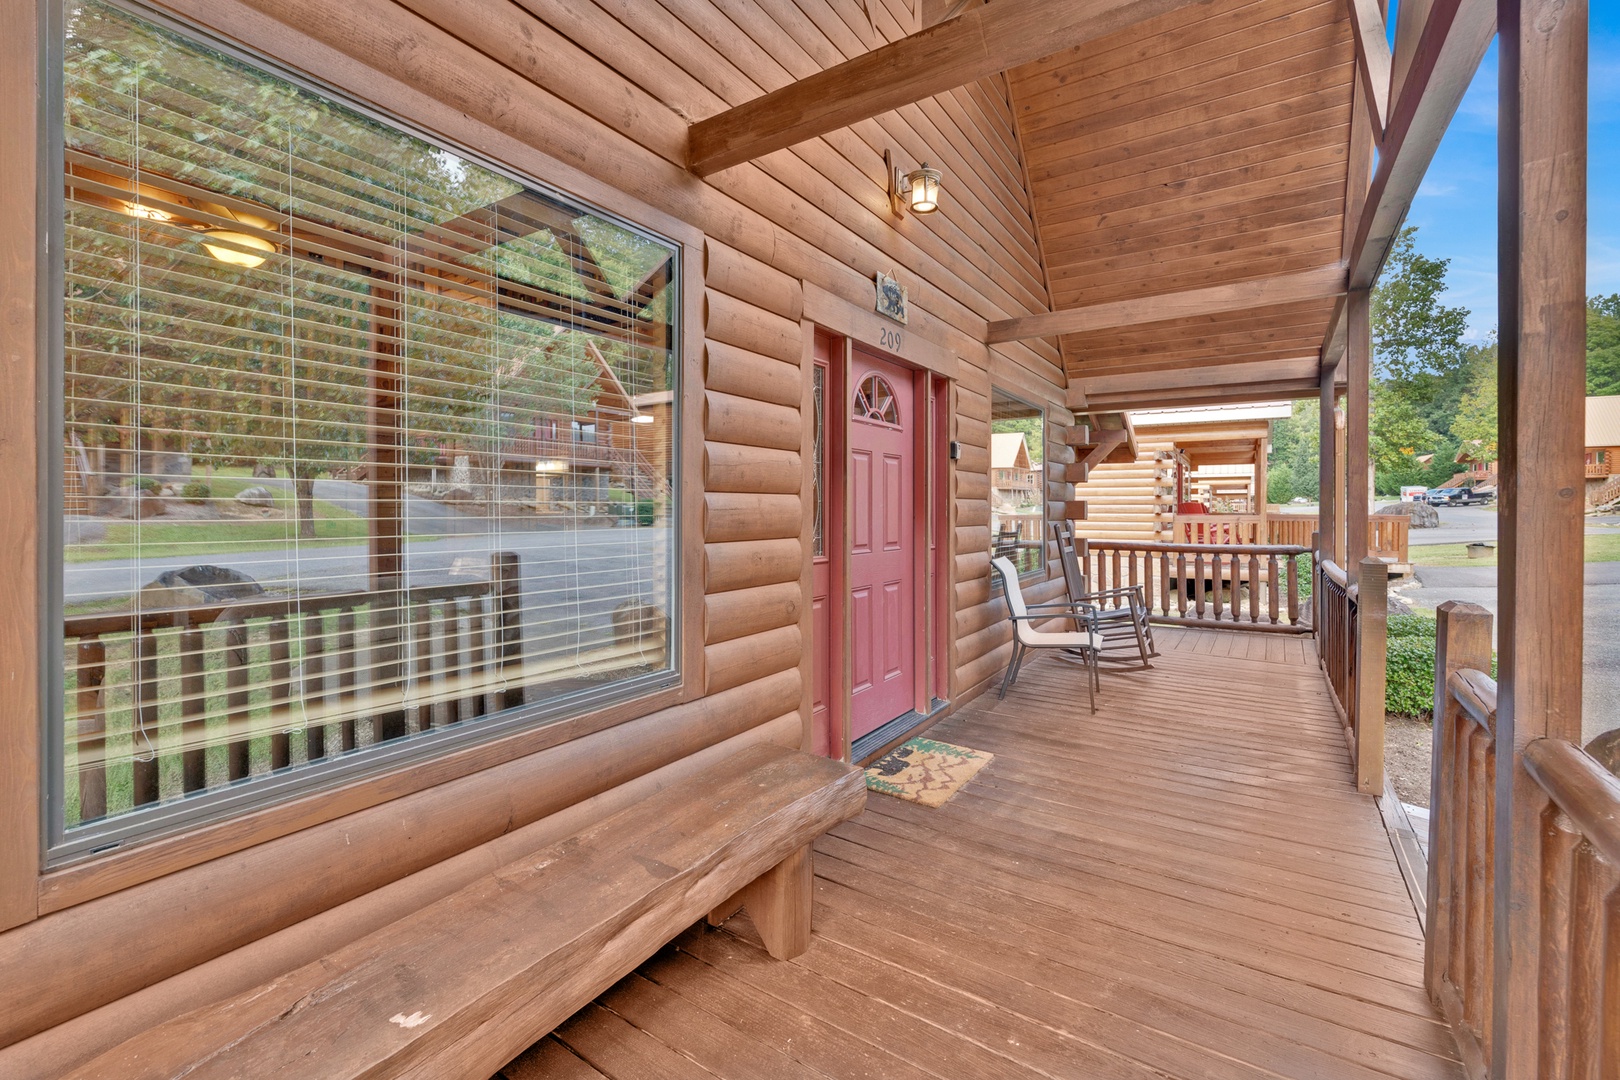 This cabin is equipped with keyless entry for guest convenience